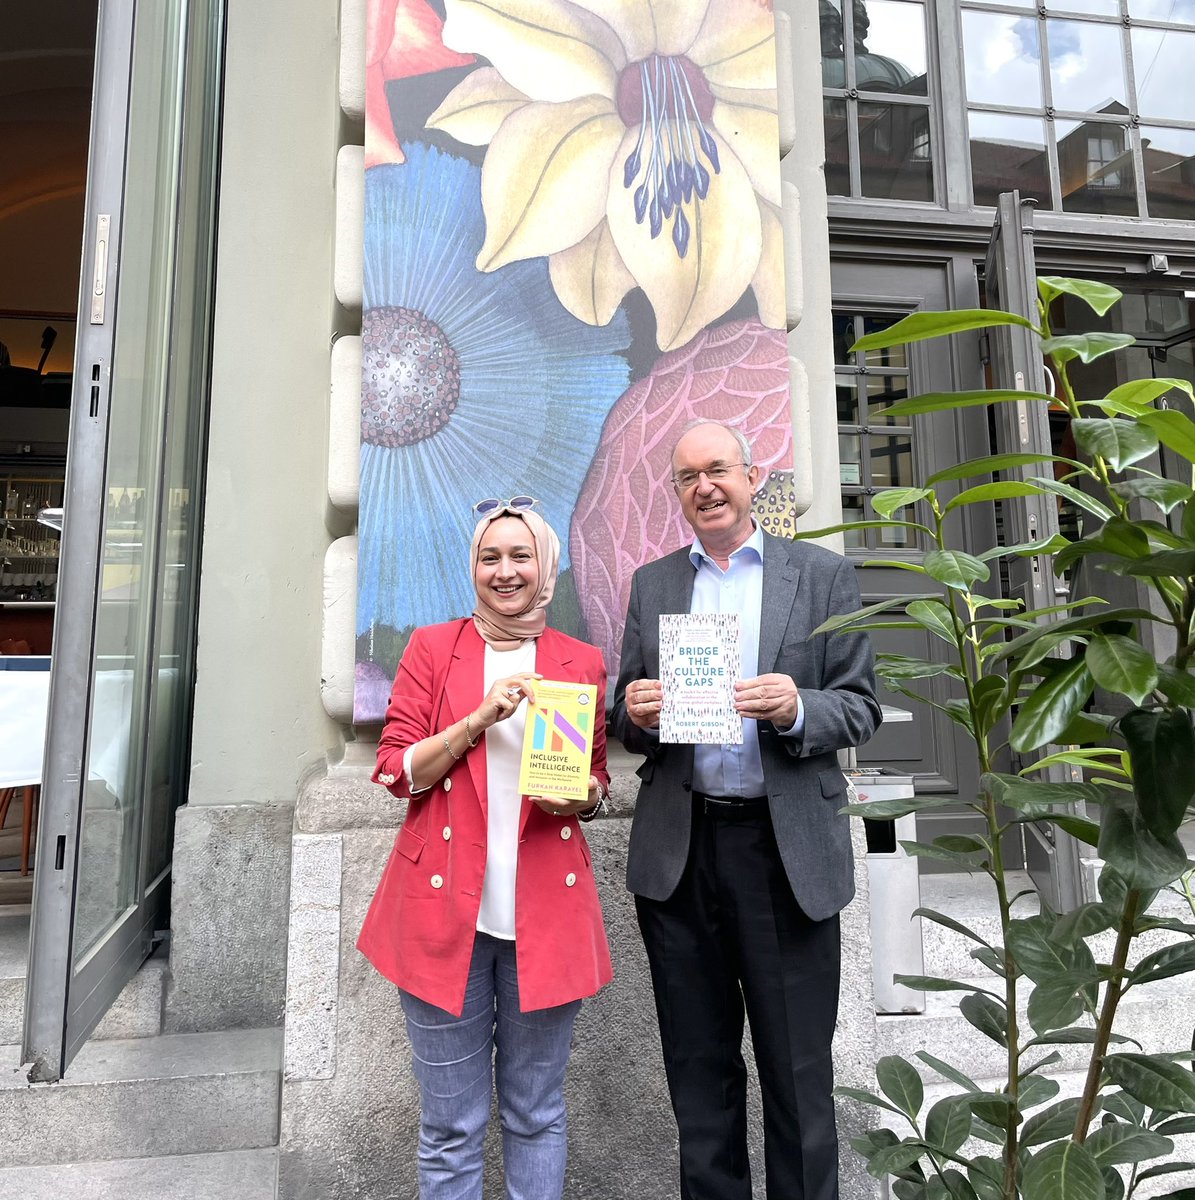 It was fantastic to meet with the amazing Robert Gibson @RGIntercultural in person today at Literaturhaus Munich ! We had a great conversation on interculturalism, diversity, Inclusion, our books and our publishing stories! Robert’s book : amzn.to/3MSKrG1